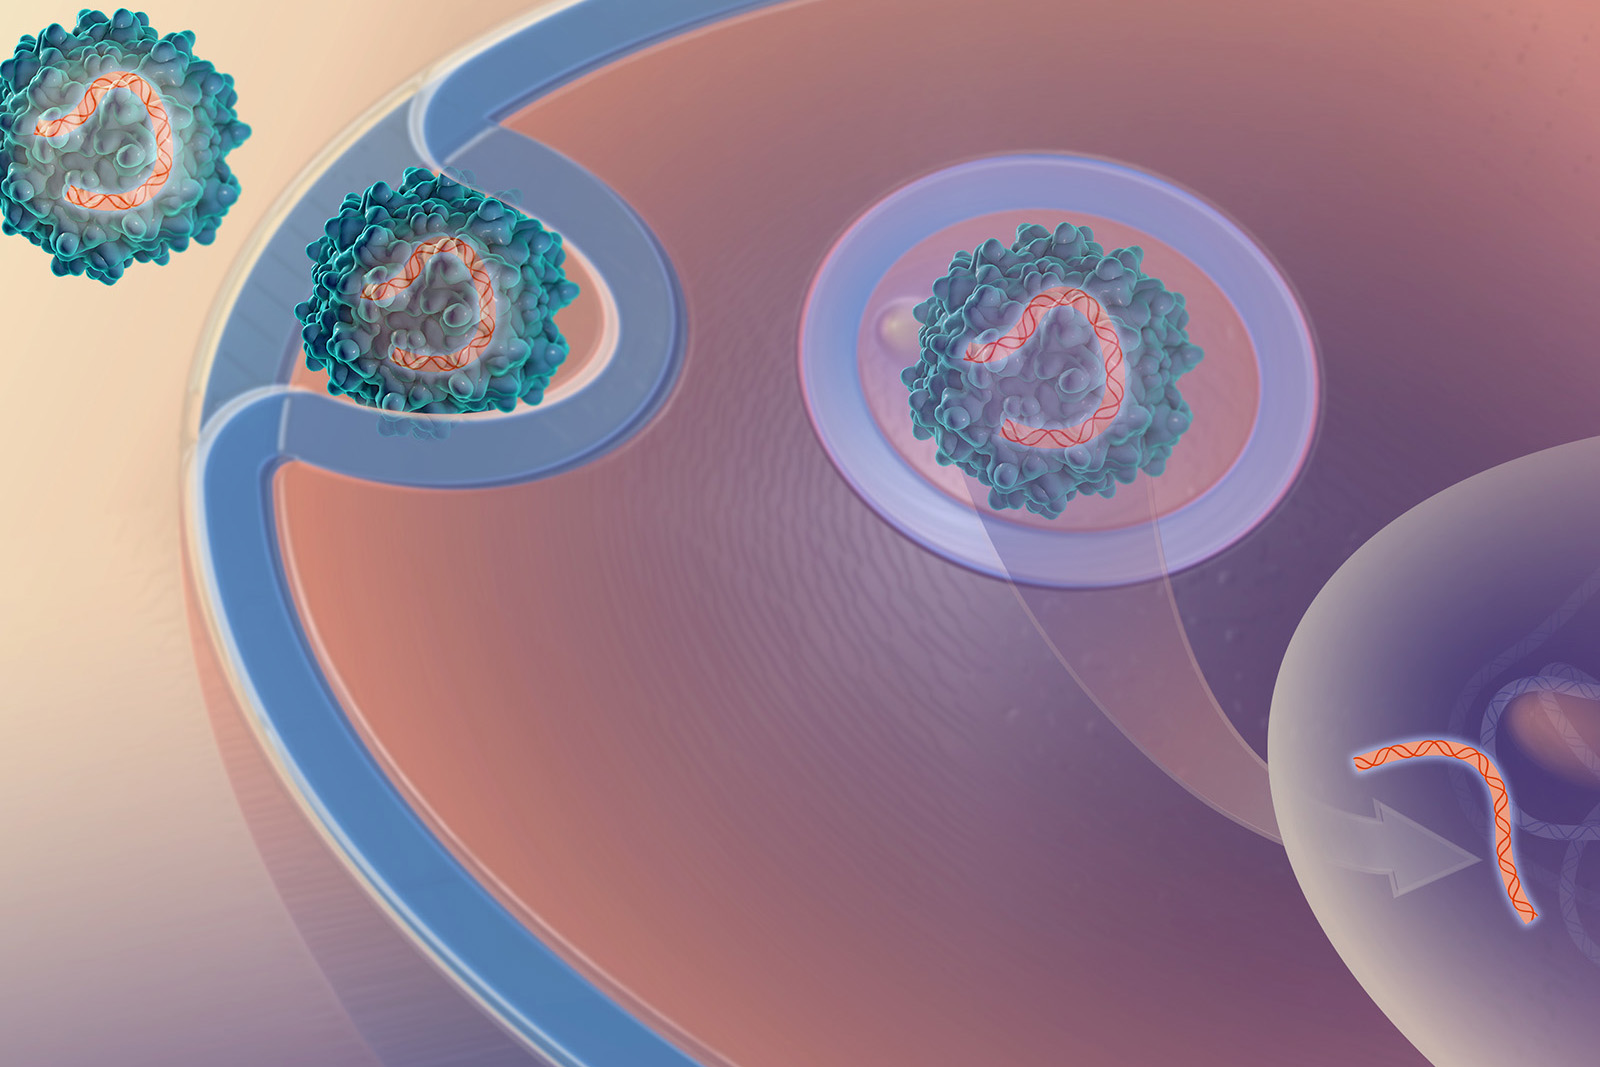 Illustration of a virus delivering genetic material into a cell